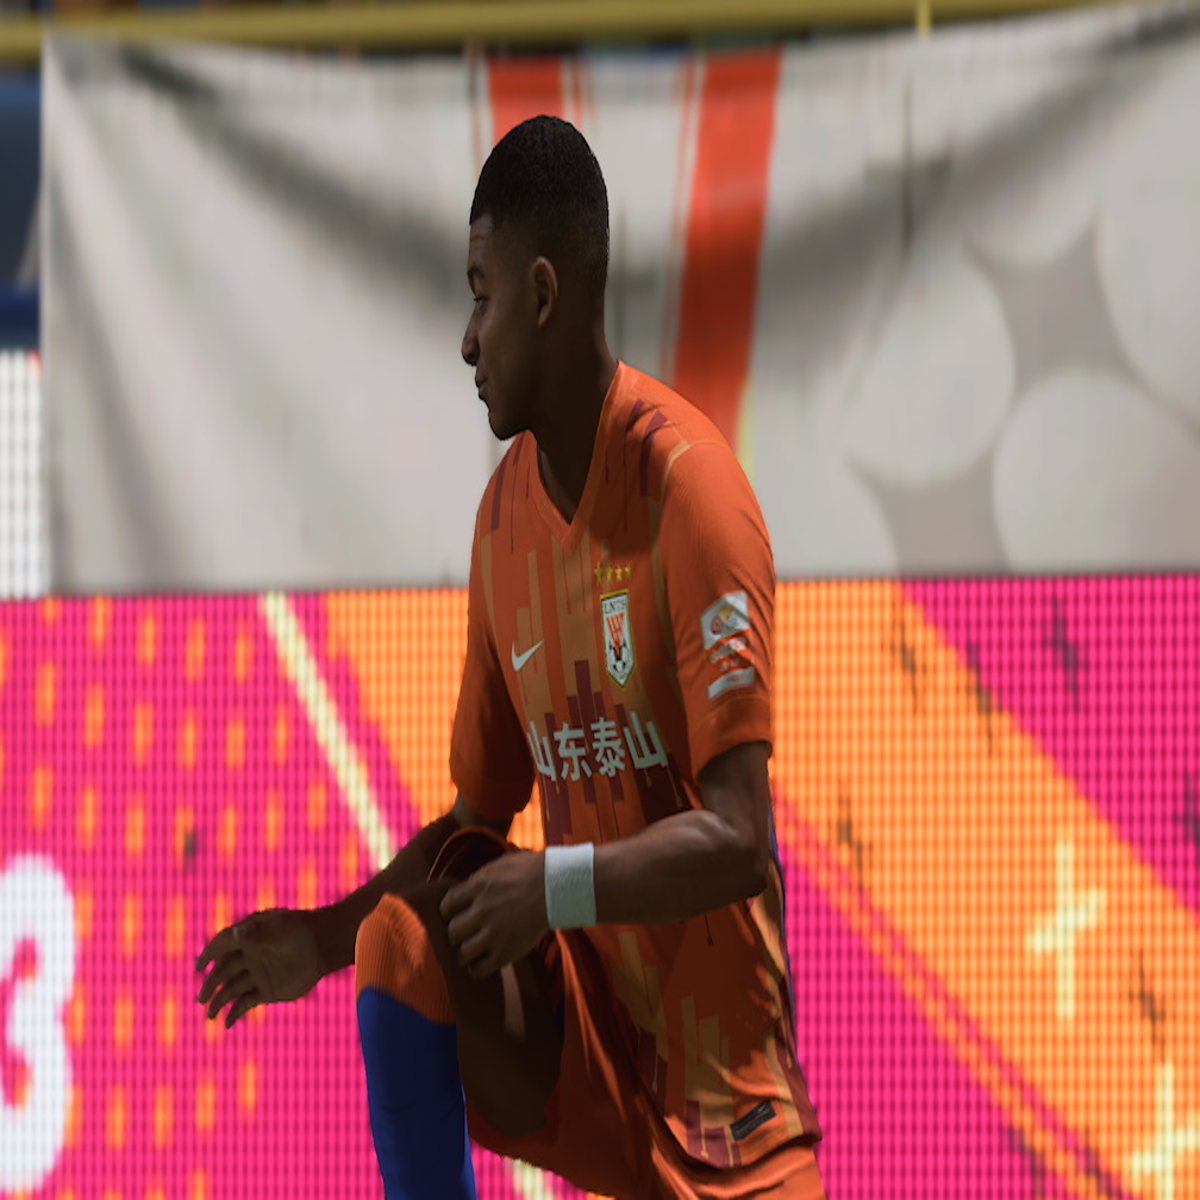 FIFA 23 trailer drops with users able to play as women's club